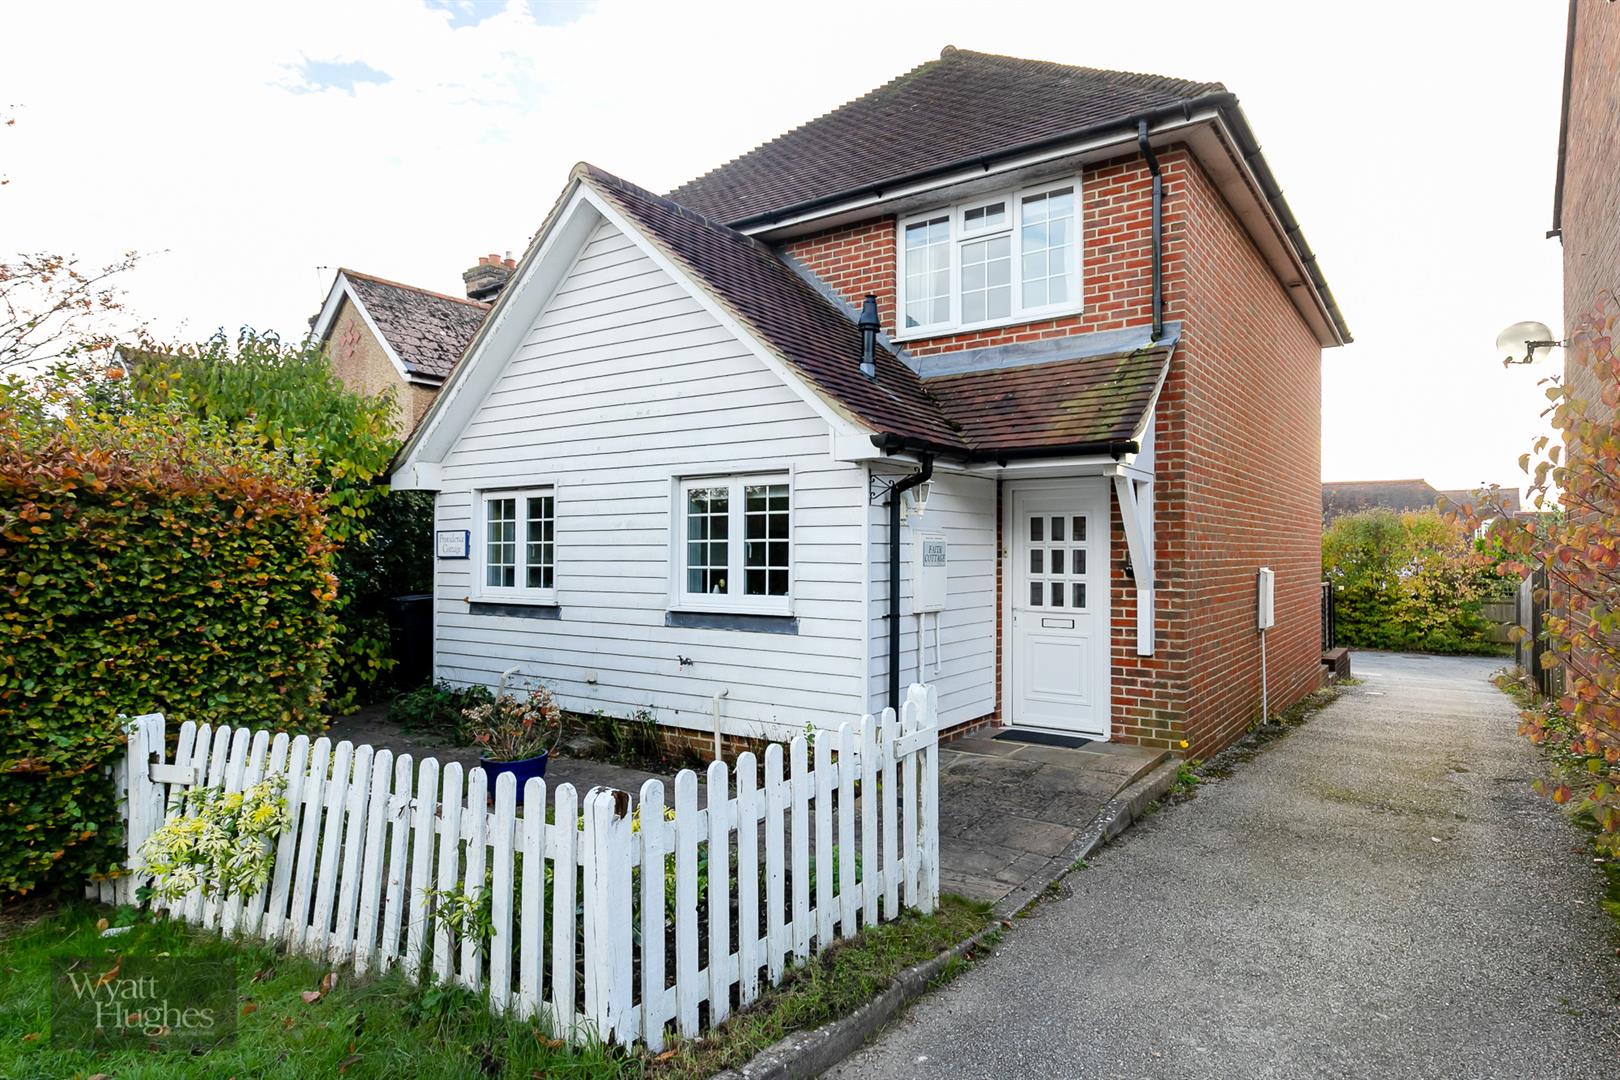 2 bed house for sale in St. Marys Lane, Ticehurst, TN5 